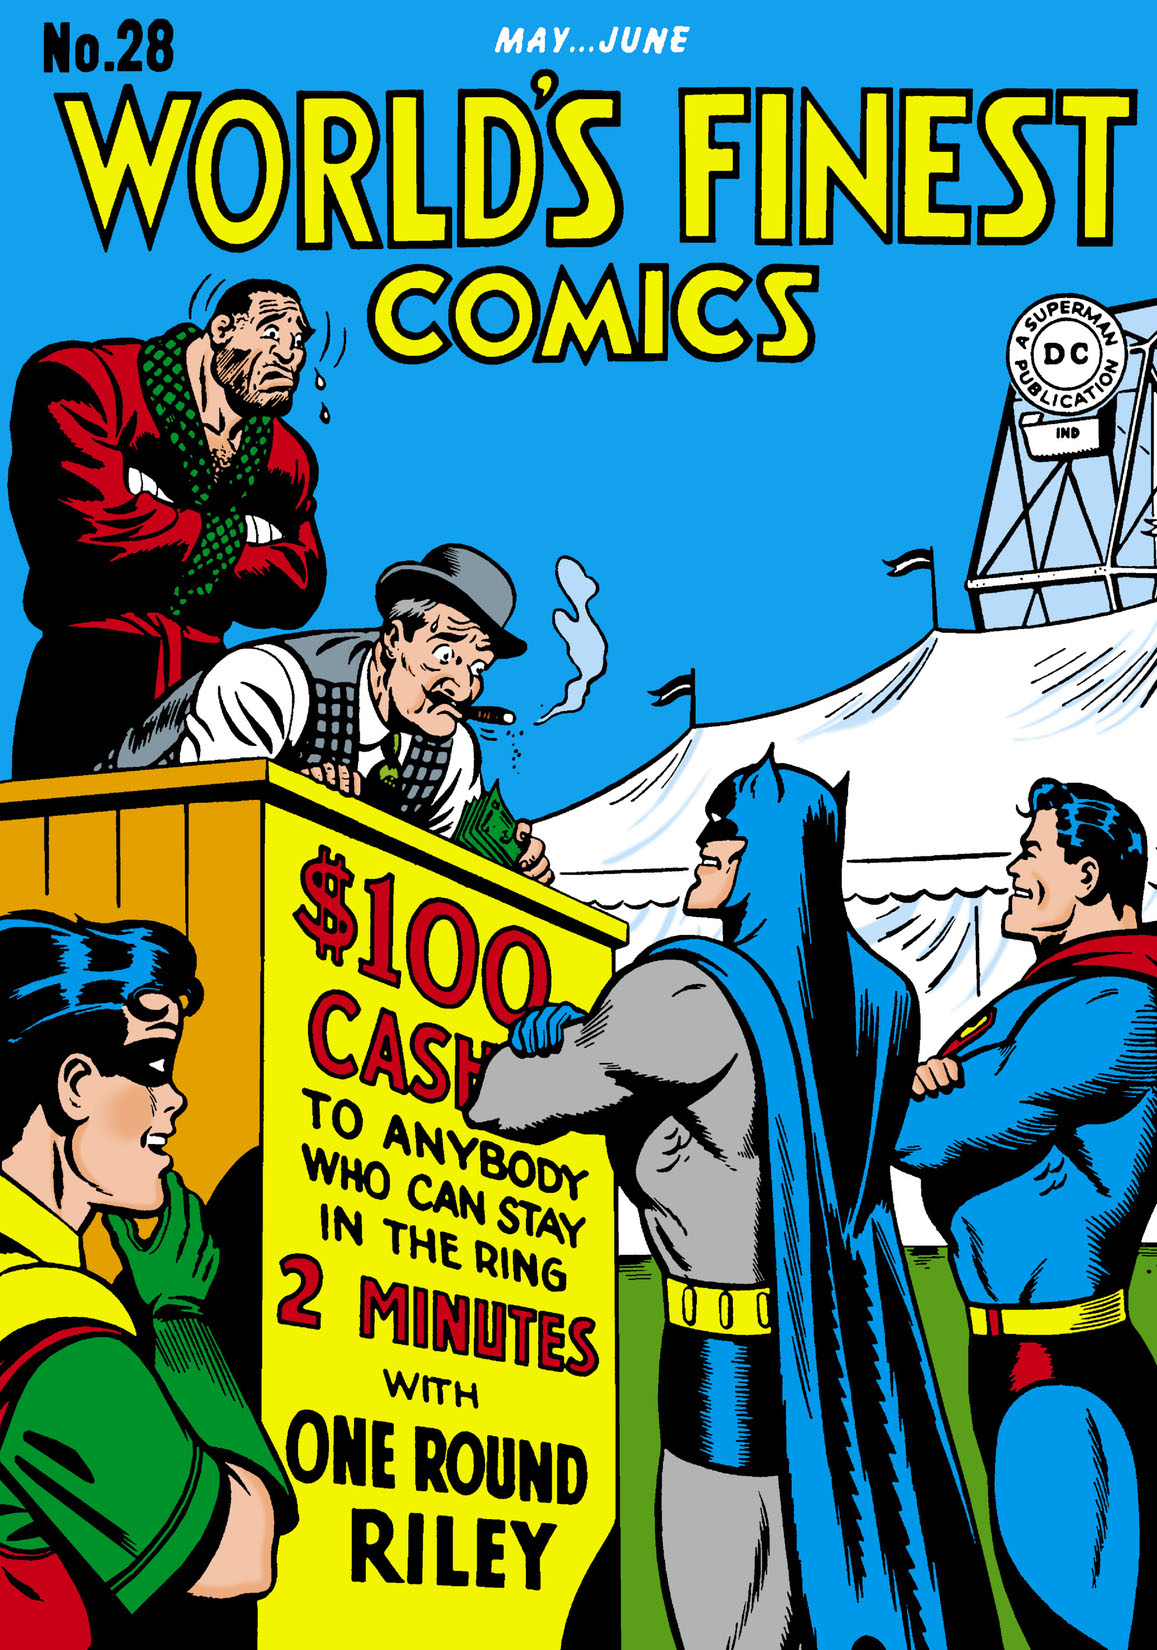 World's Finest Comics (1941-) #28 preview images